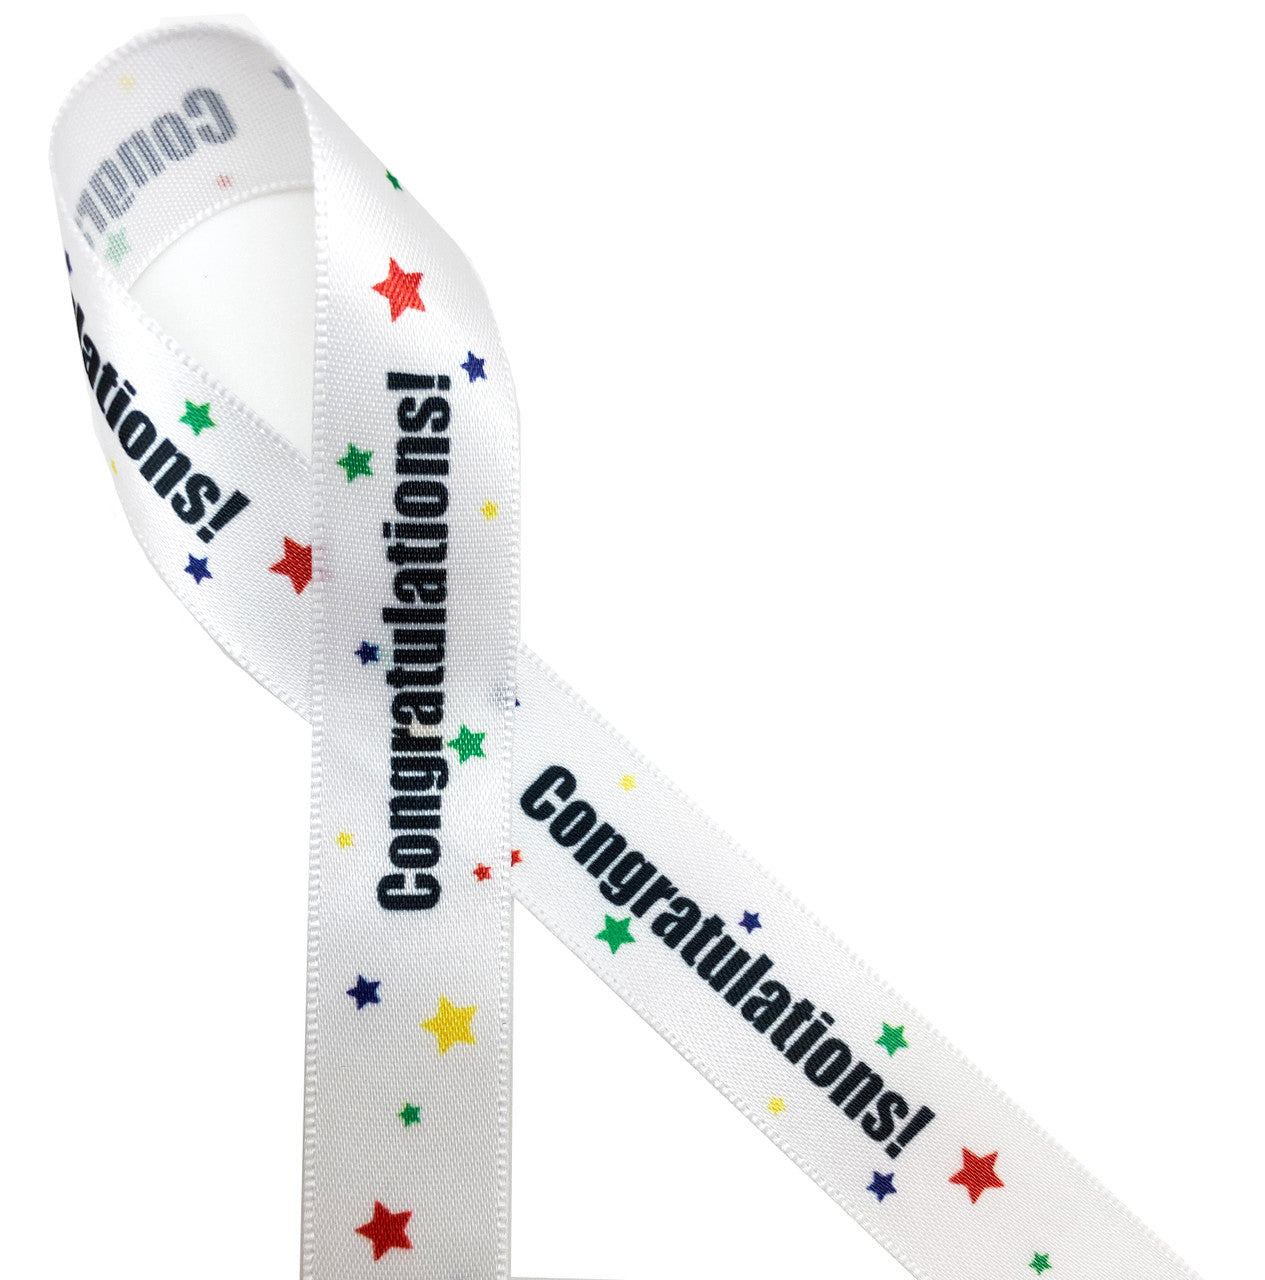 Congratulations in black on a colorful star studded background is a fun ribbon for any celebratory occasion!